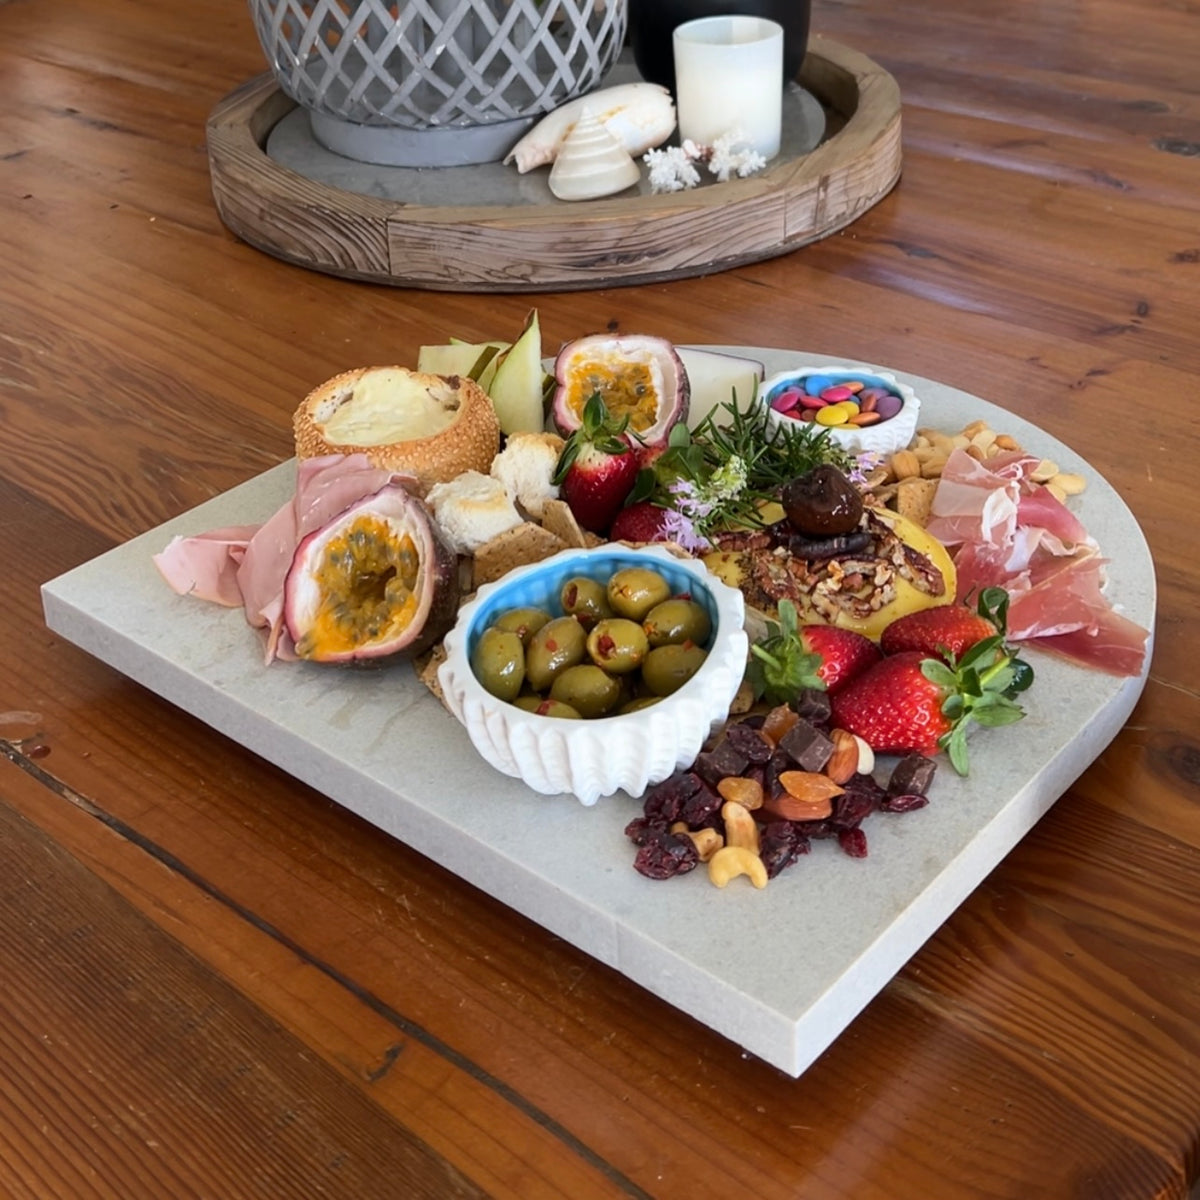 Extra Large Grazing Platter styled with fresh fruit, cheese and cured meats. Grazing board is like a marble platter.